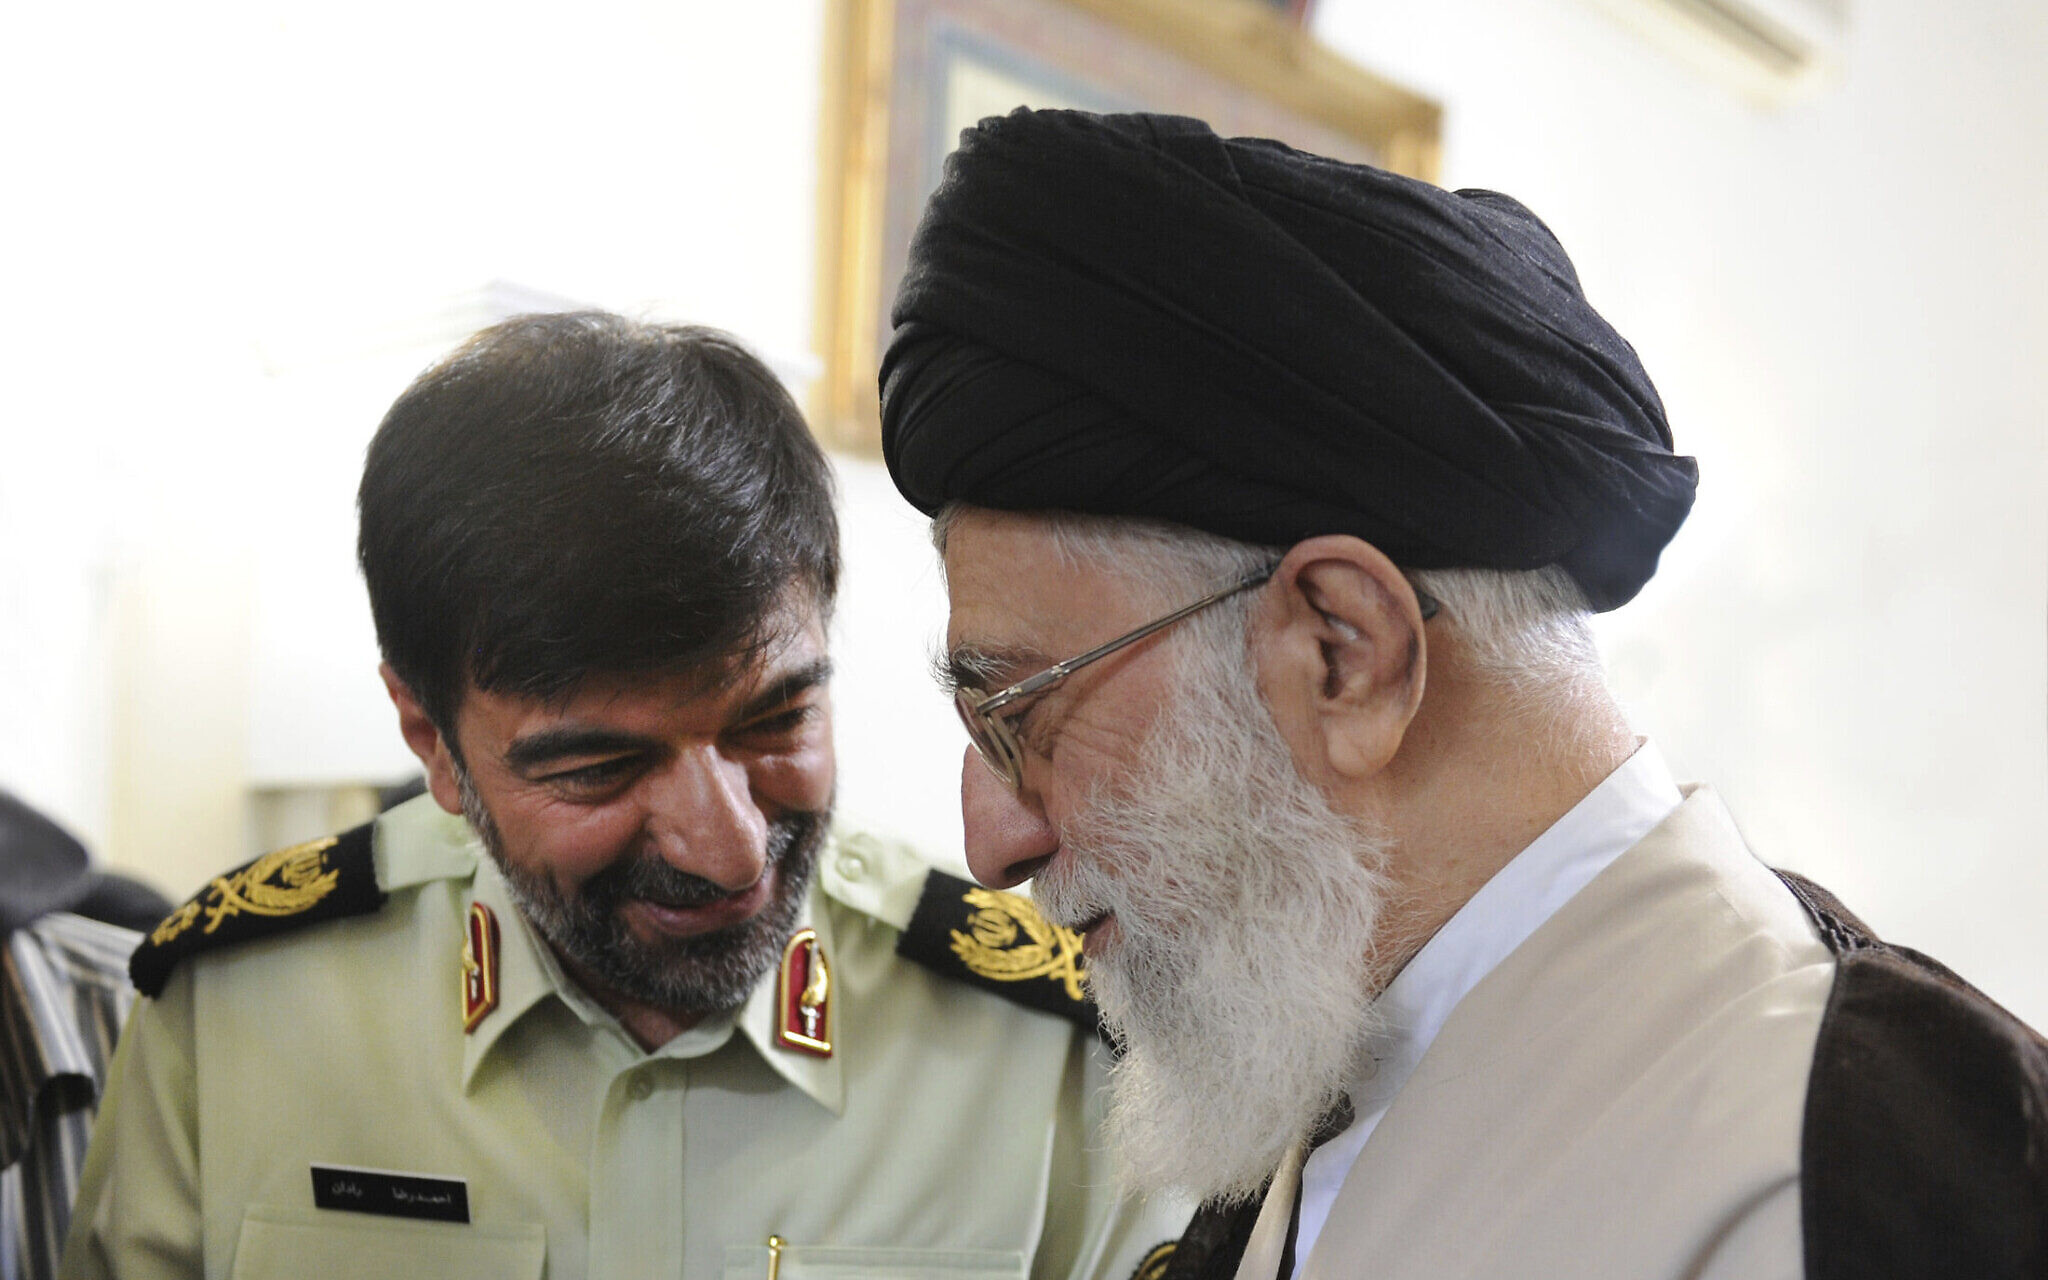 Iran's Khamenei replaces police chief as country roiled by months of unrest  | The Times of Israel